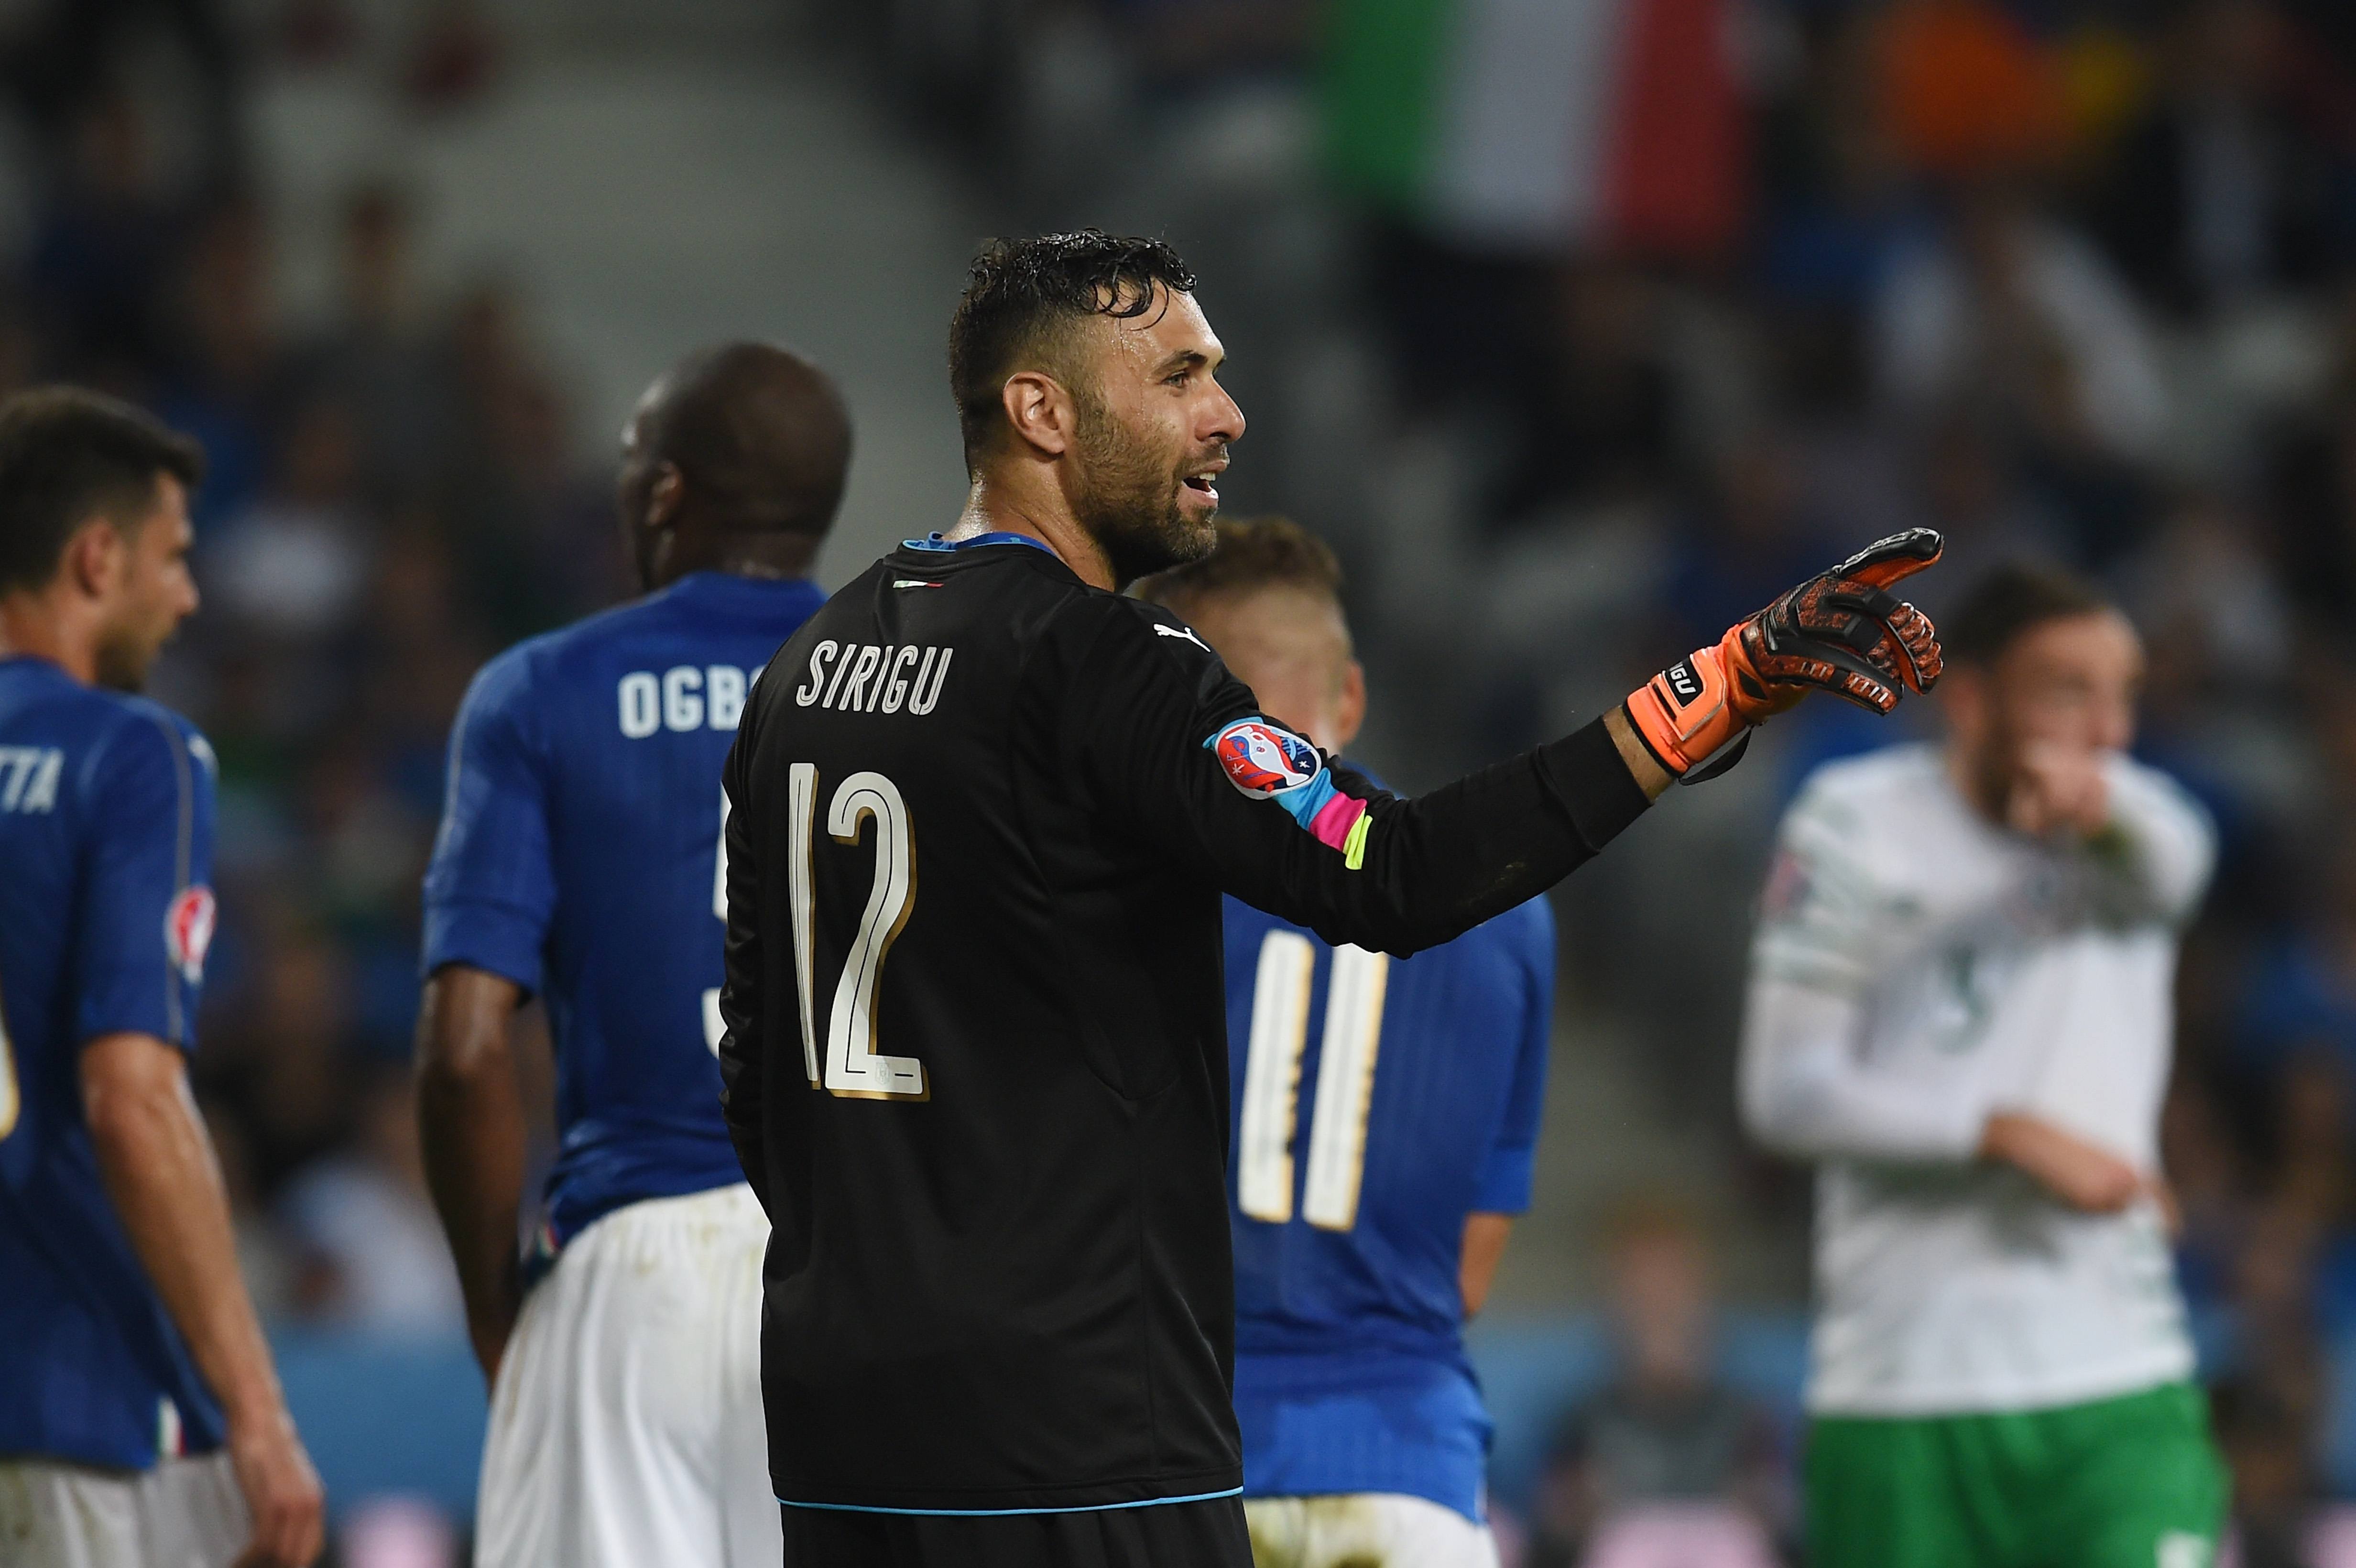 LILLE, FRANCE - JUNE 22:  Salvatore Sirigu of Italy gestures during the UEFA EURO 2016 Group E match between Italy and Republic of Ireland at Stade Pierre-Mauroy on June 22, 2016 in Lille, France.  (Photo by Claudio Villa/Getty Images)